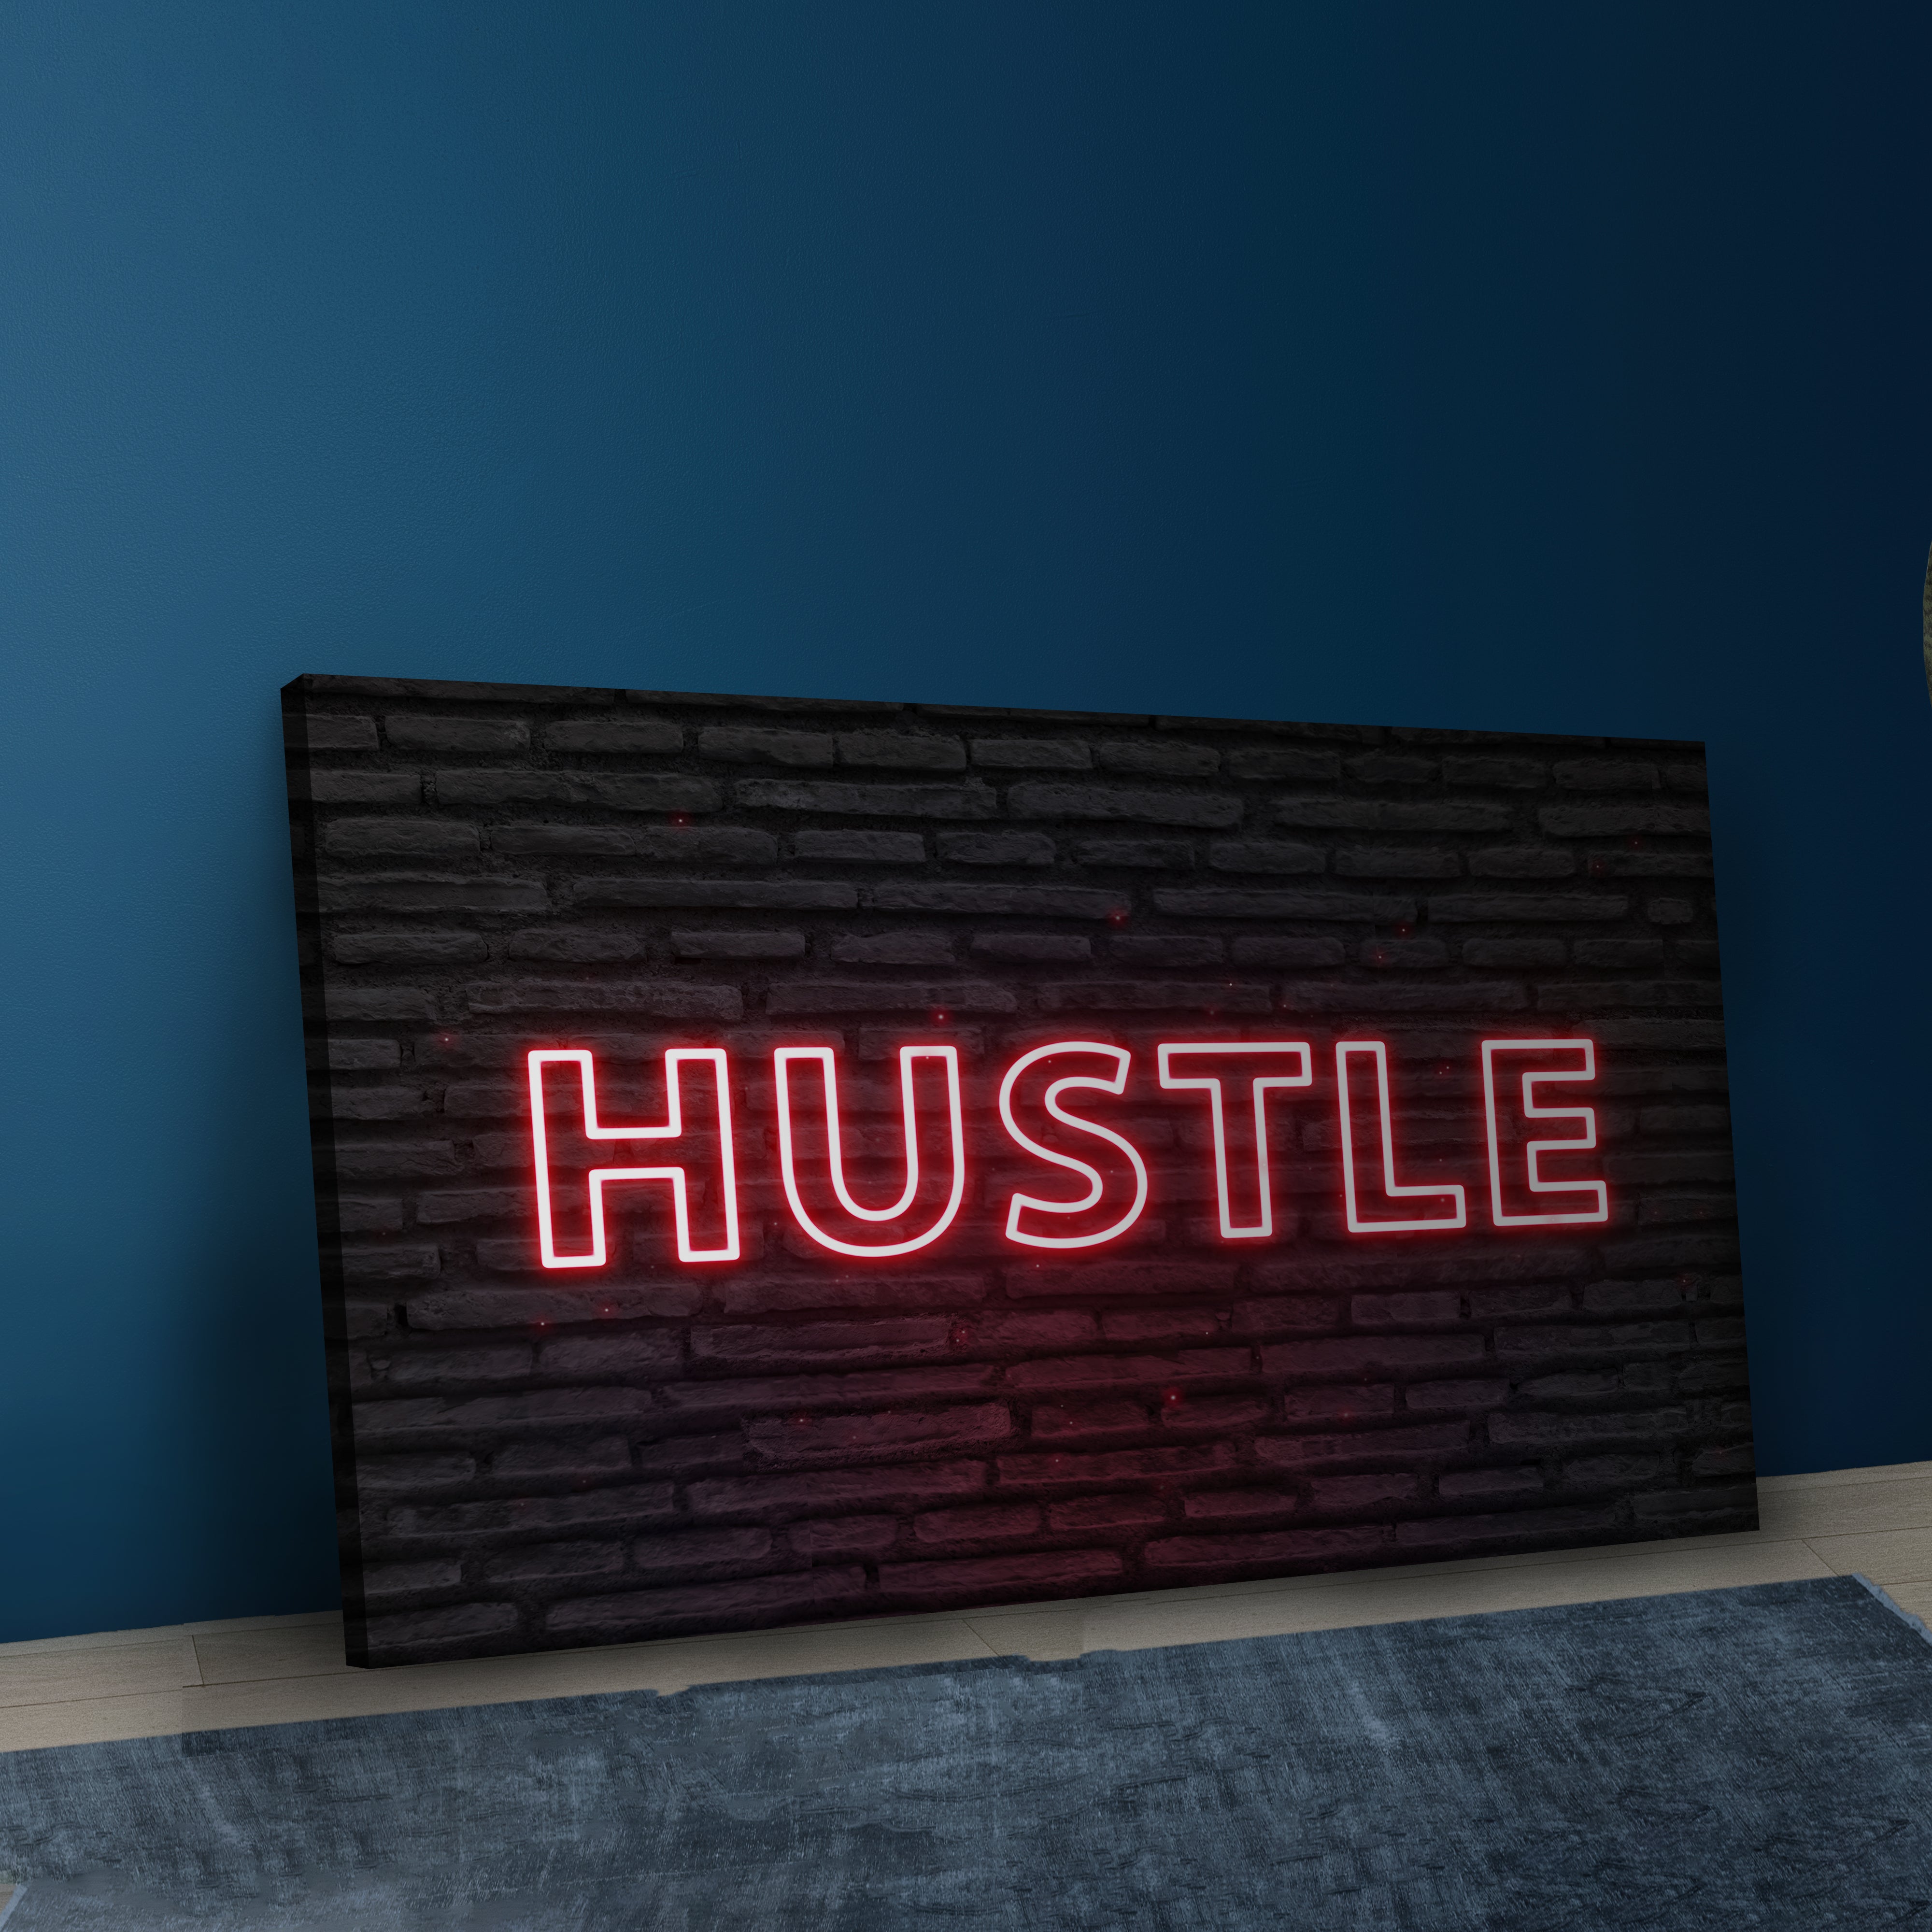 Hu for Hustle - Motivational Quotes.